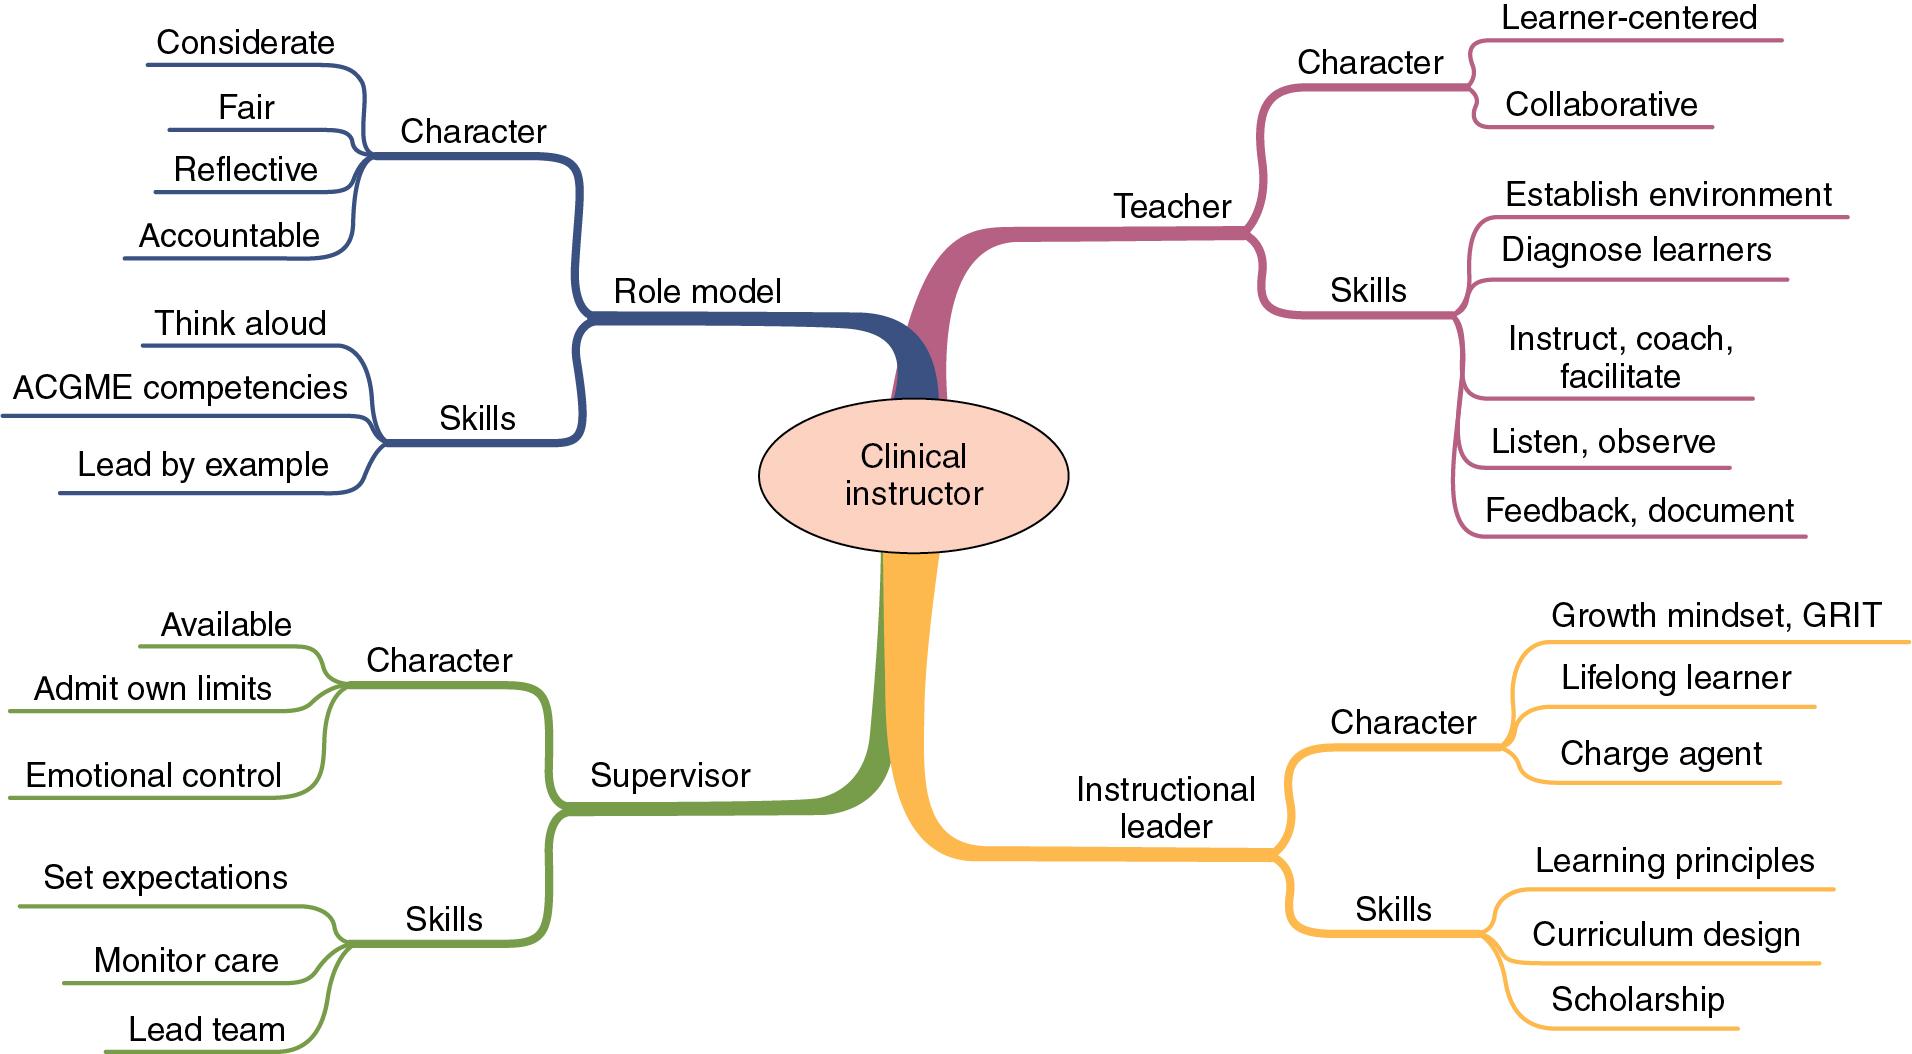 Fig. 63.1, This mind map outlines the four roles of the clinical instructor, and each of the roles is further divided into elements of character. These include role model, teacher, supervisor, and instructional leader. Each of these four elements is further divided into specific skills.